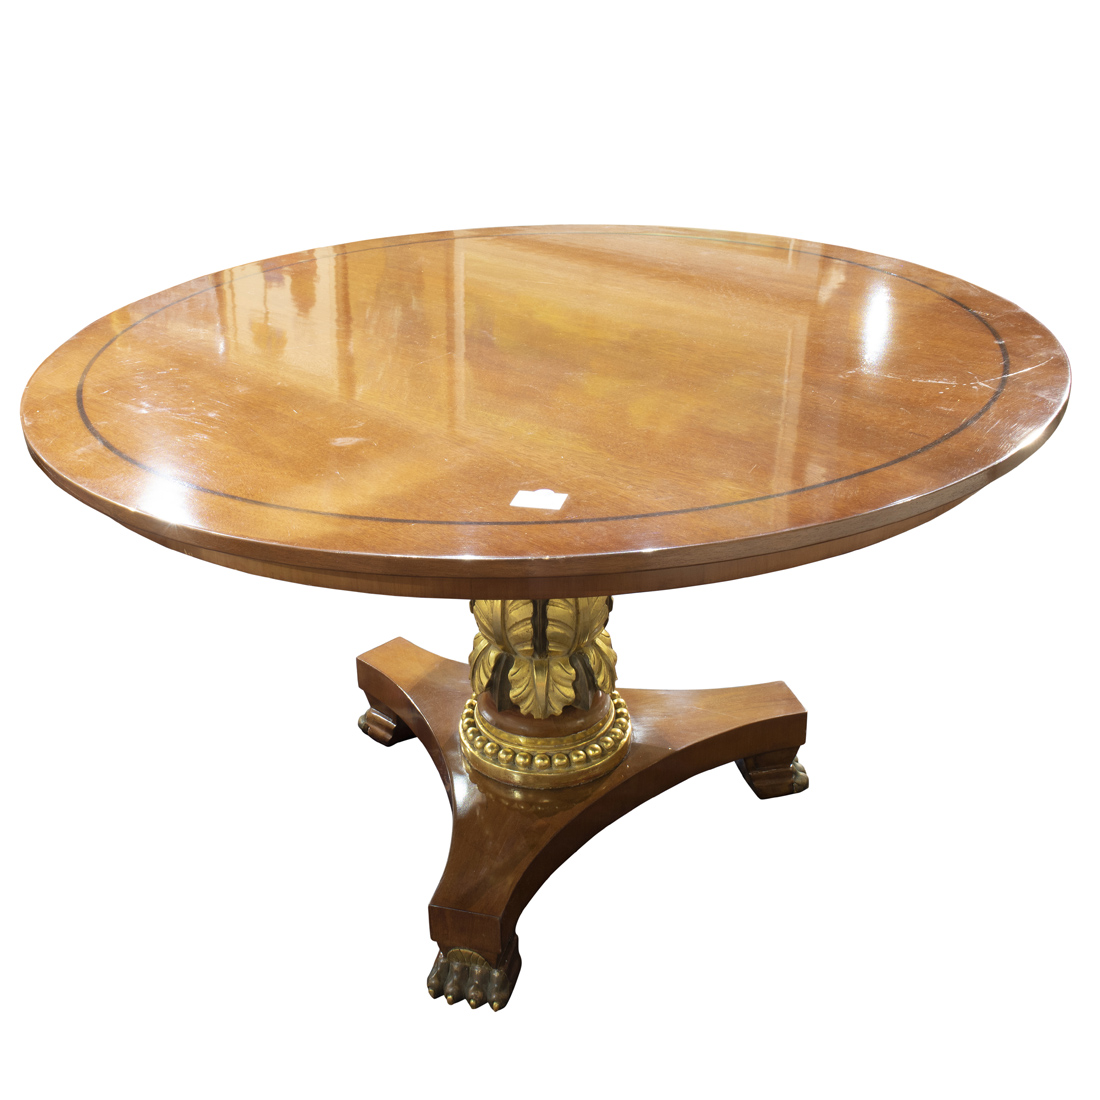 A FRENCY EMPIRE STYLE CENTER TABLE 3a5765